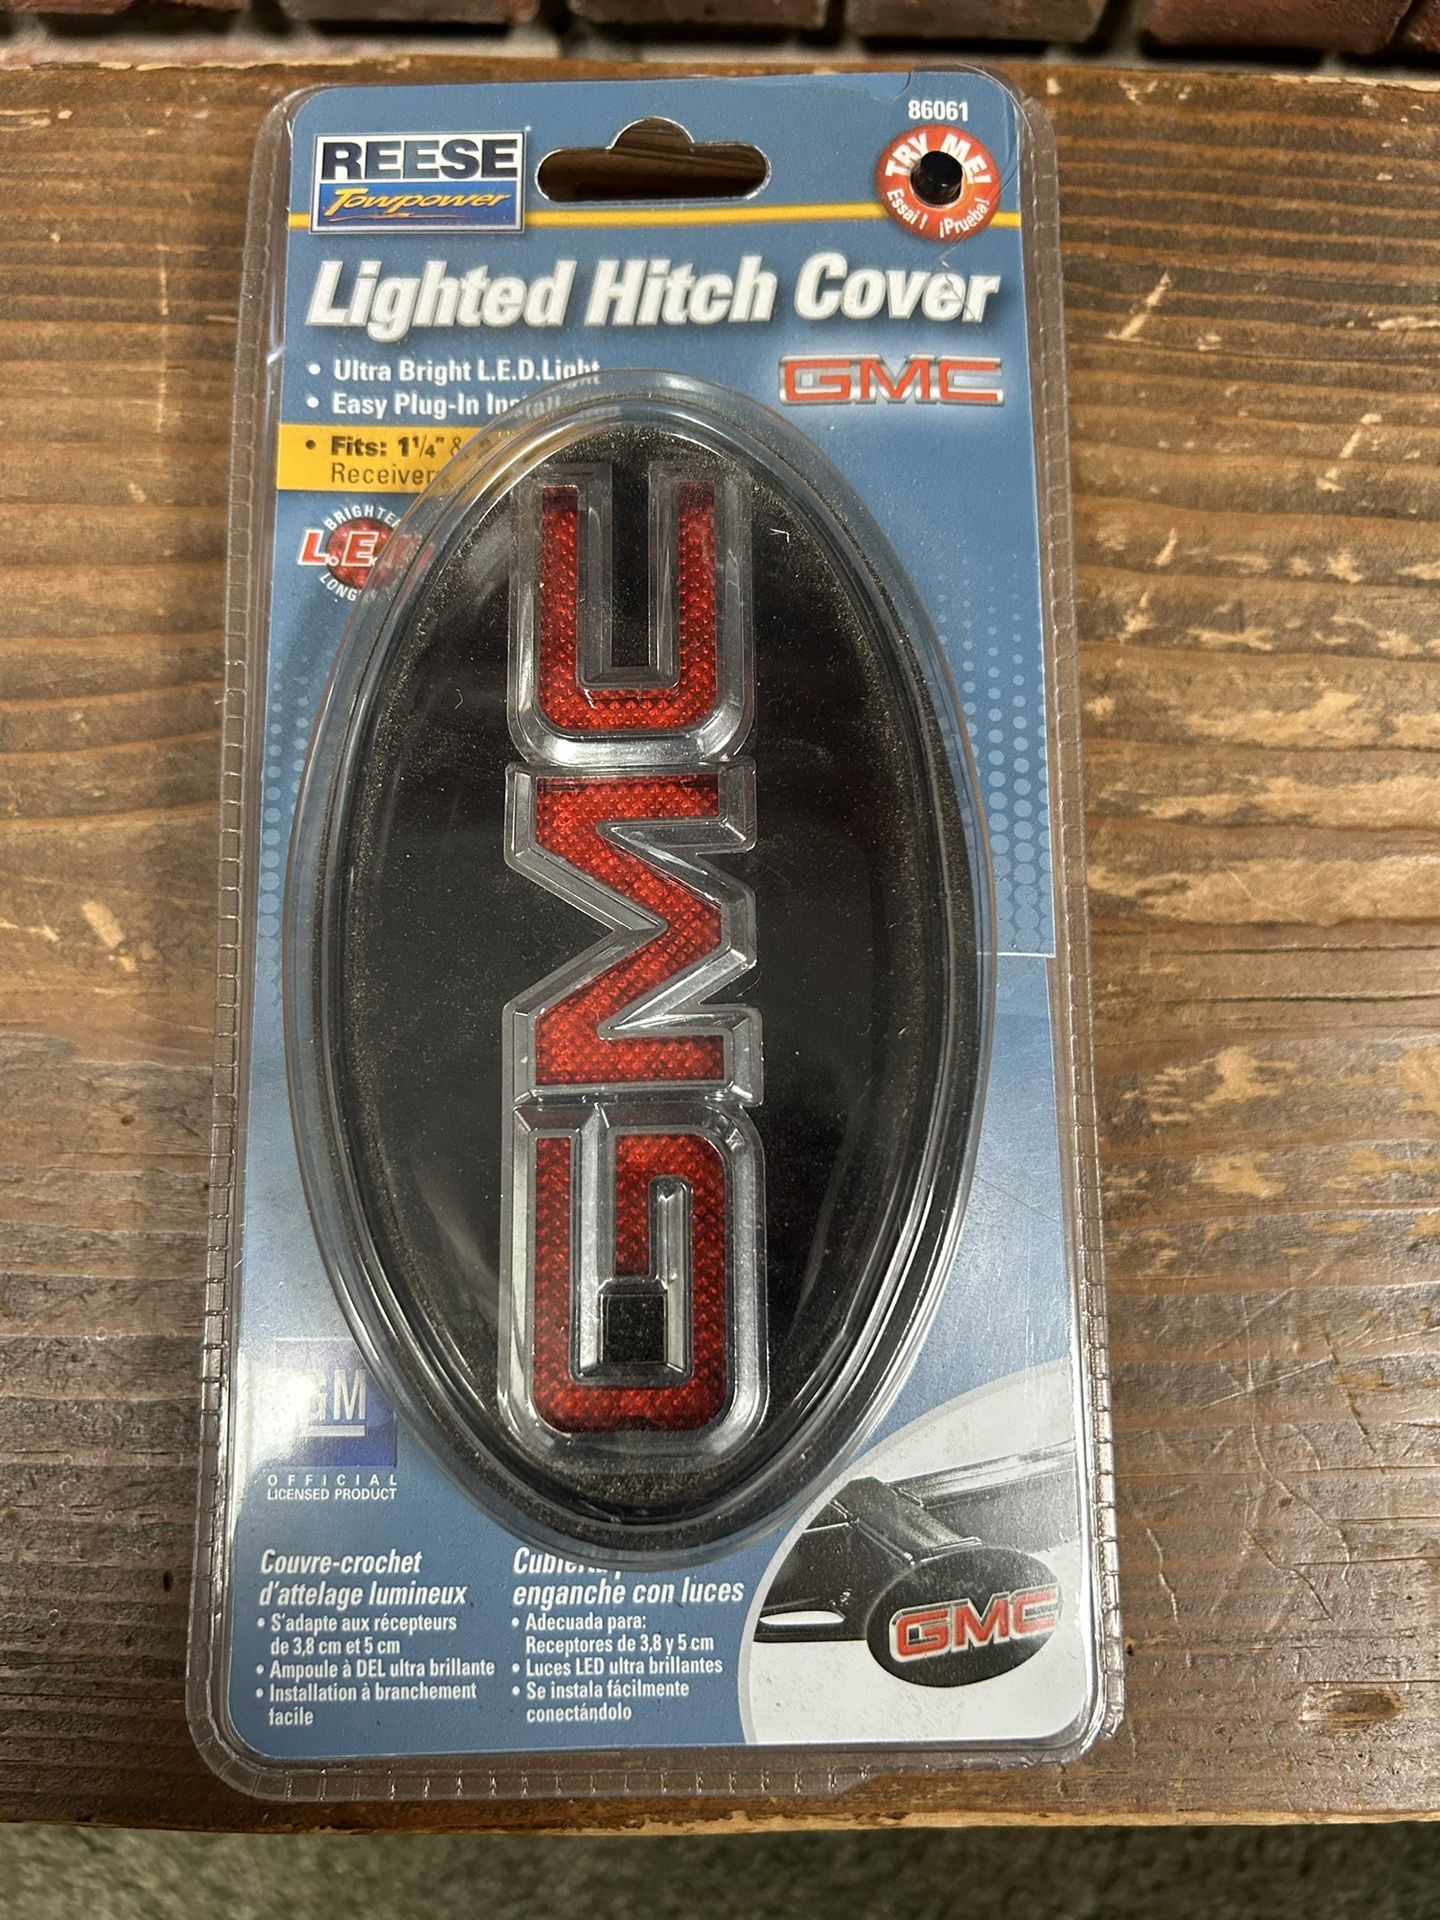 Lighted Hitch Cover